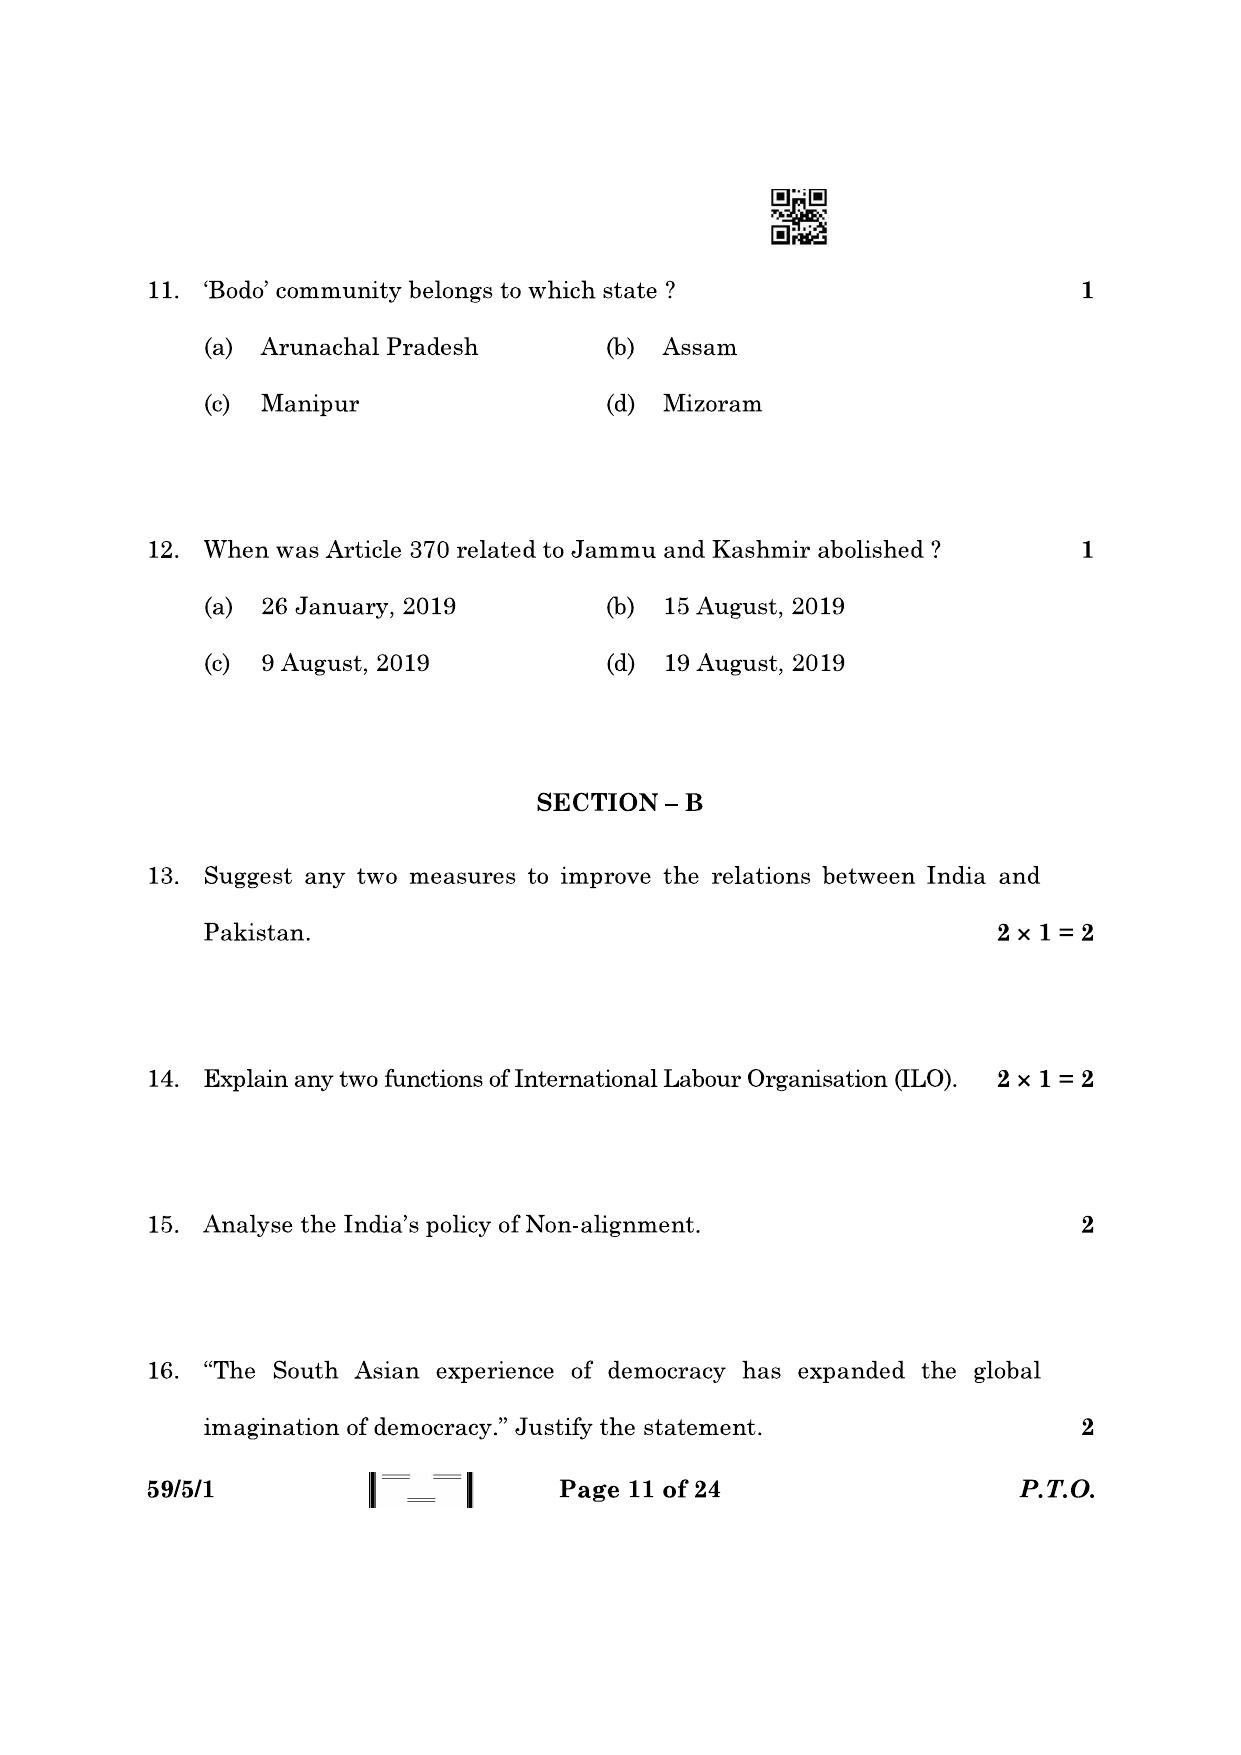 CBSE Class 12 59-5-1 Political Science 2023 Question Paper - Page 11